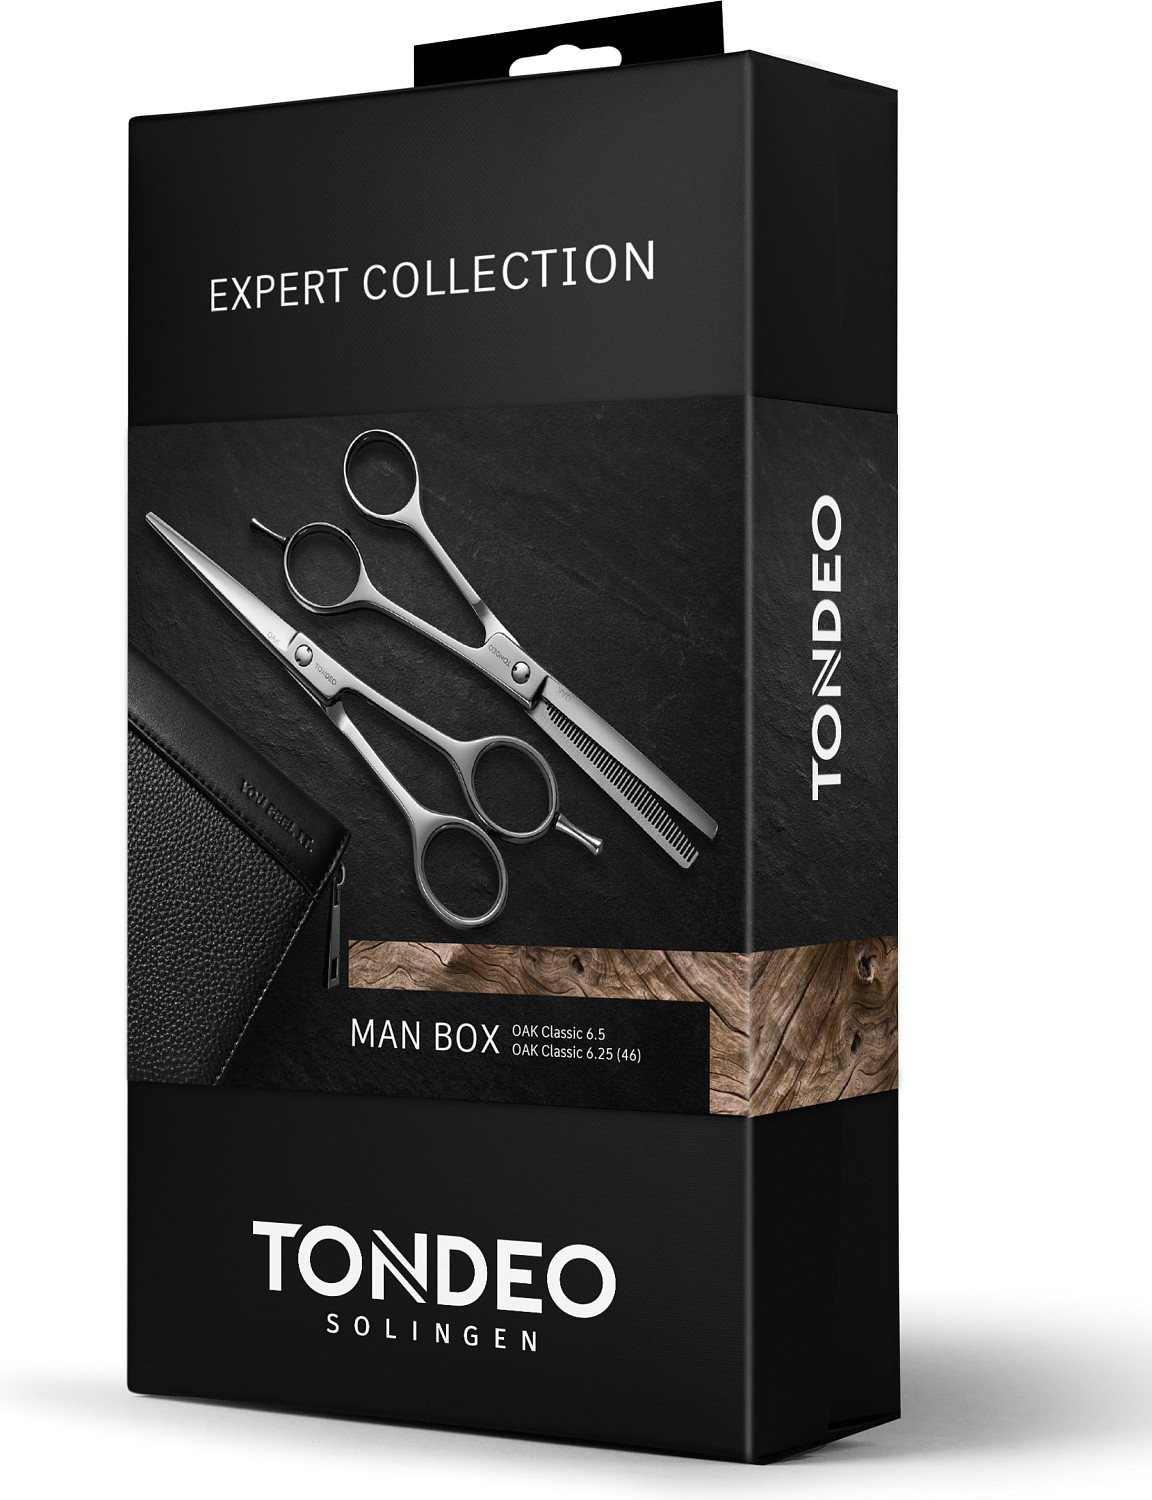  Tondeo Expert Collection Box Man Classic 5.5 